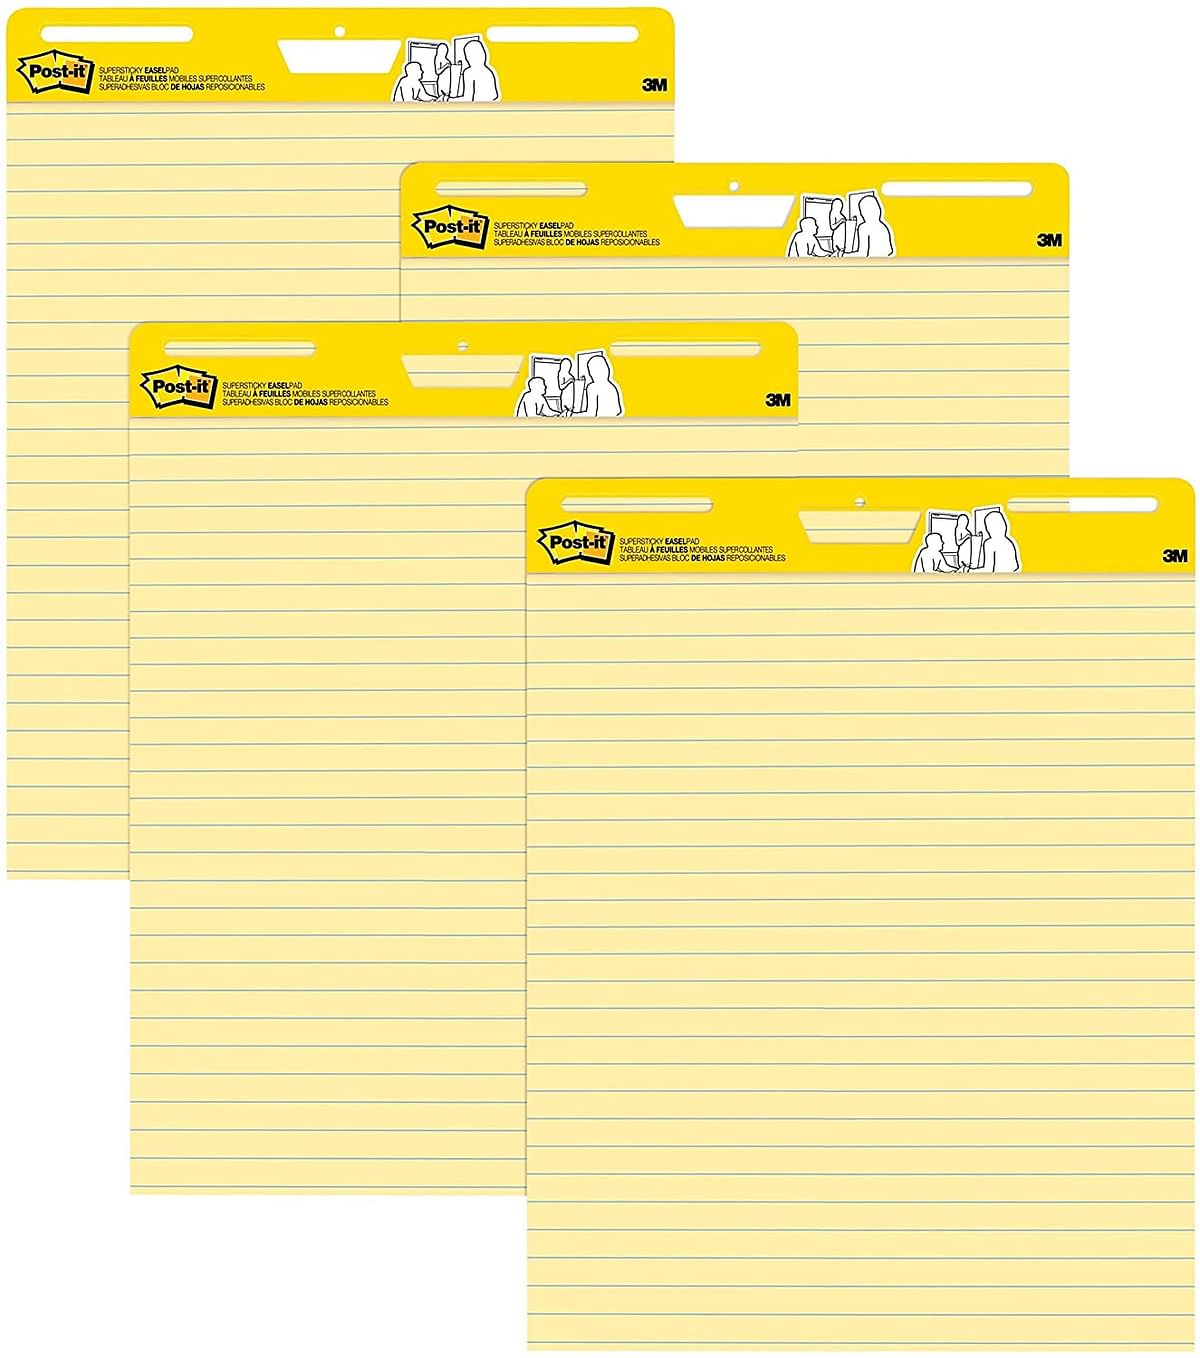 Post-it Easel Pad, 25 x 30 Inch sheets, Yellow Paper with Lines, 30 Sheets/Pad, Pack of 2/2 Pads/Yellow